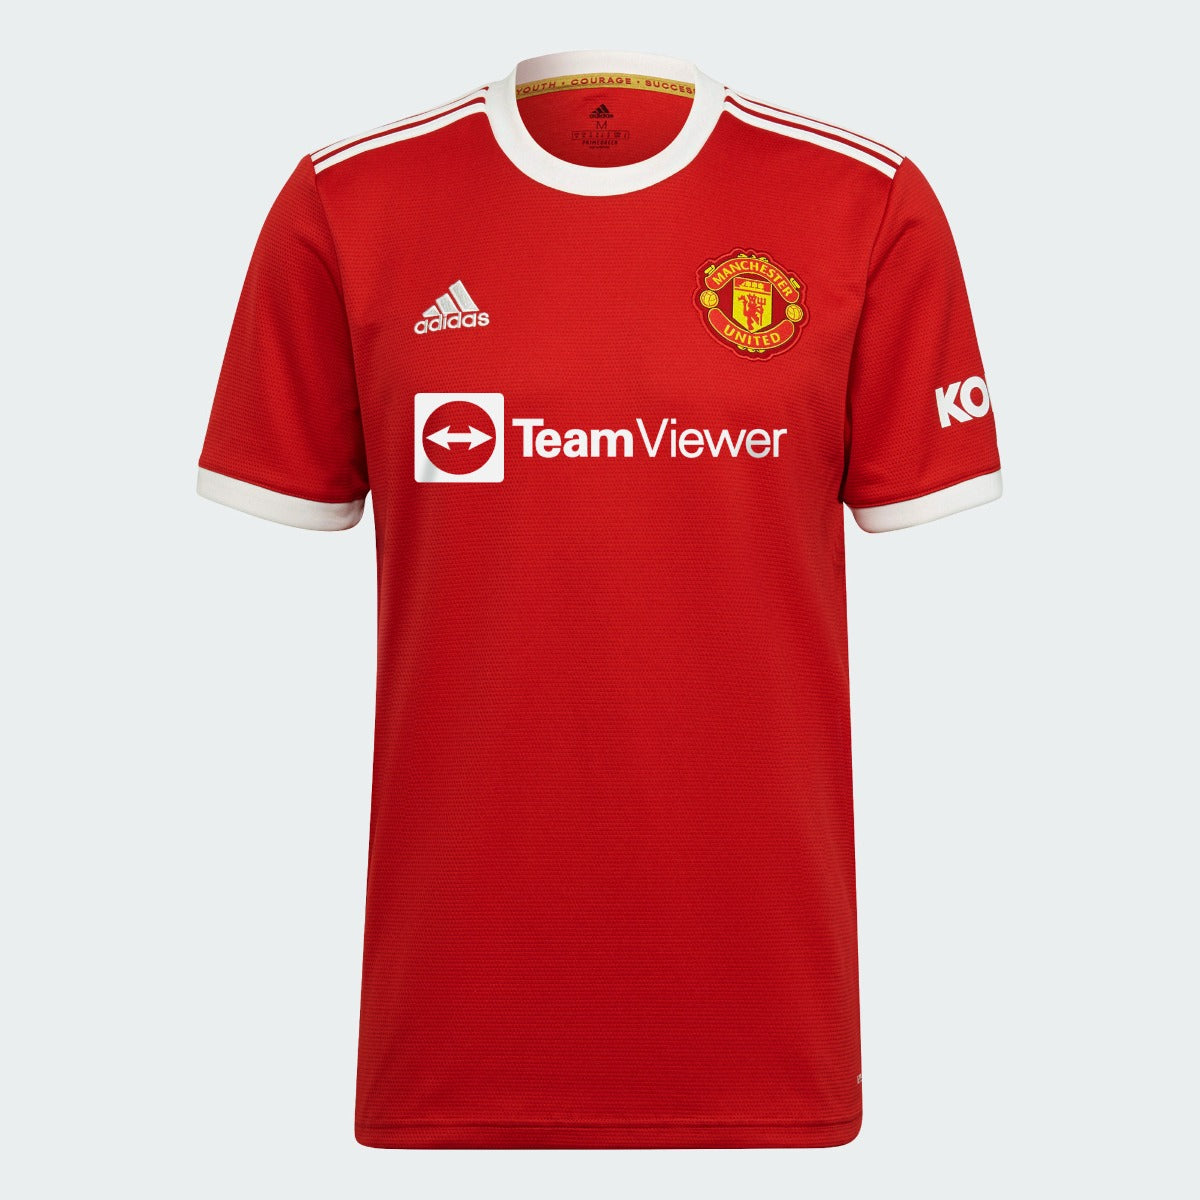 Adidas 2021-22 Manchester United Home Jersey - Red-White (Front)